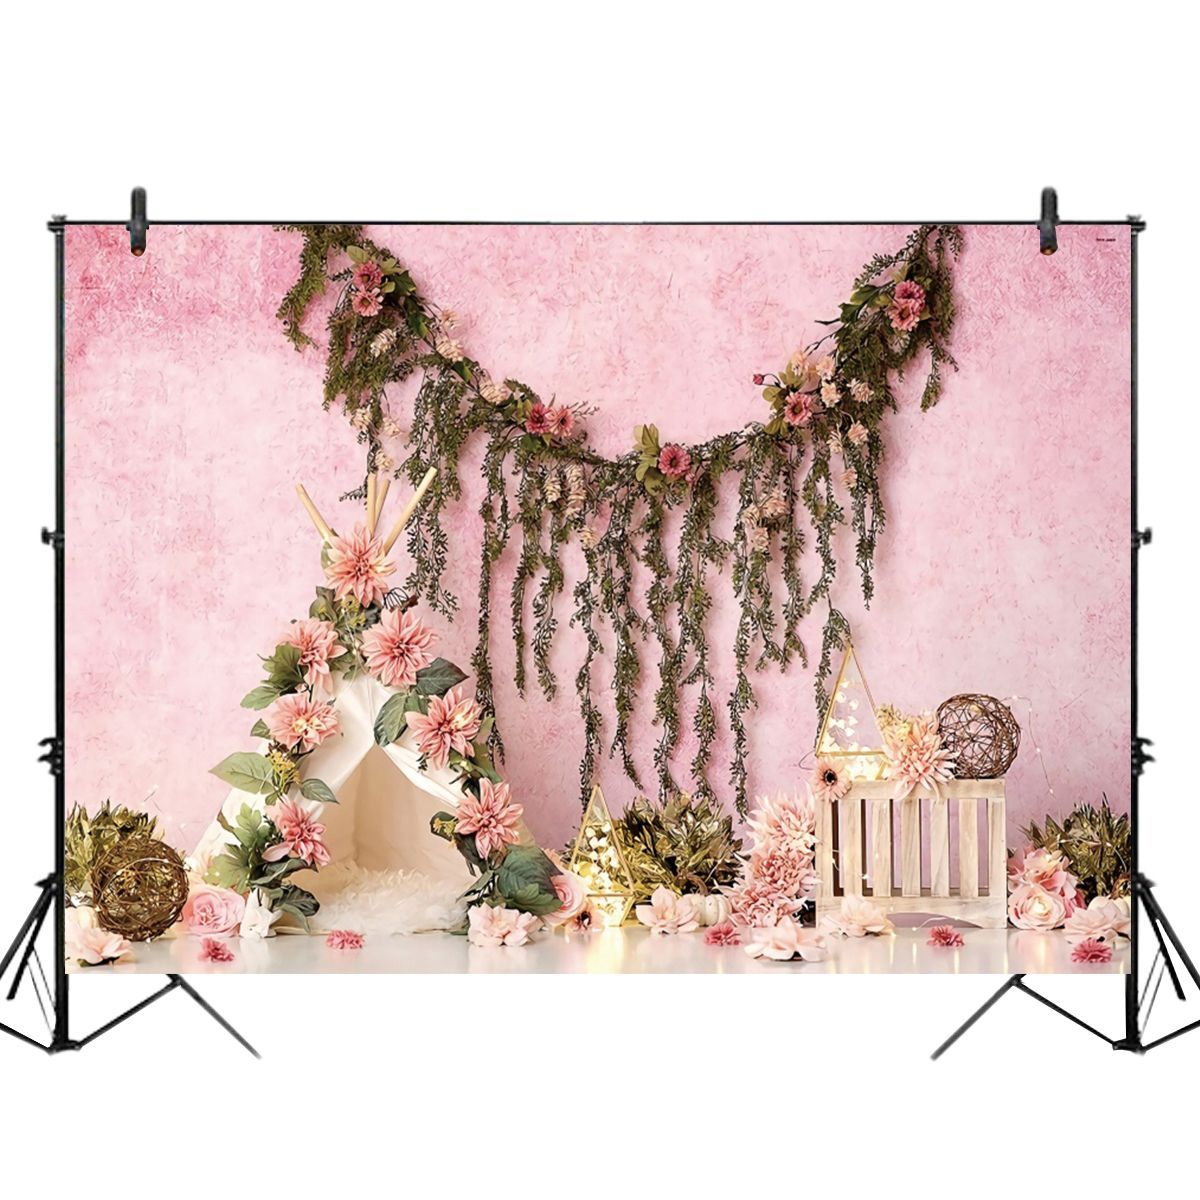 5x3FT-7x5FT-9x6FT-Flower-Decor-Pink-Wall-Photography-Backdrop-Background-Studio-Prop-1636012